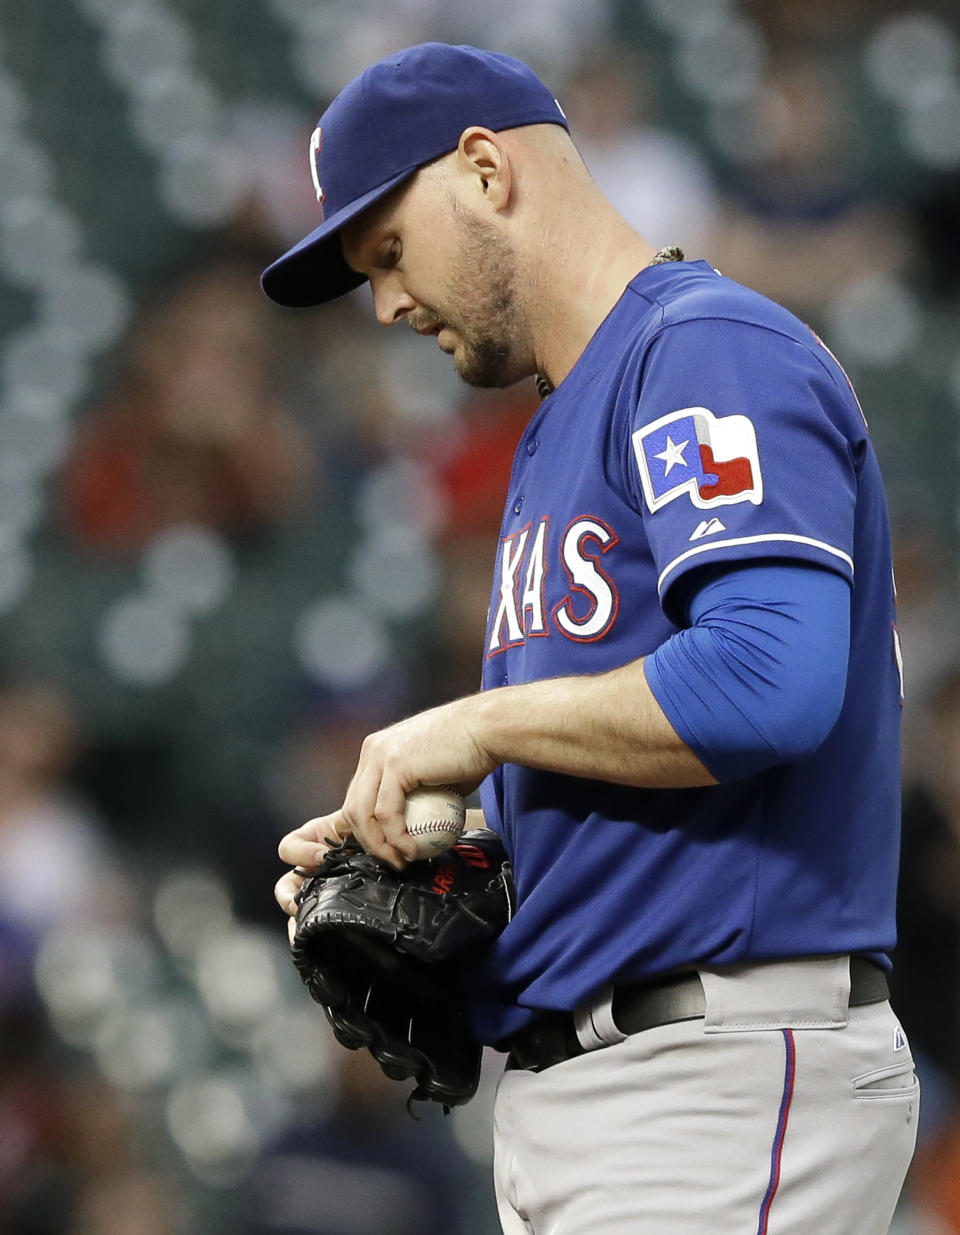 Texas Rangers starting pitcher Matt Harrison takes a moment after giving up an RBI single to Houston Astros' Dexter Fowler in the second inning of a baseball game Tuesday, May 13, 2014, in Houston. Harrison left the game after 1 2/3 innings, giving up four hits and three runs. (AP Photo)